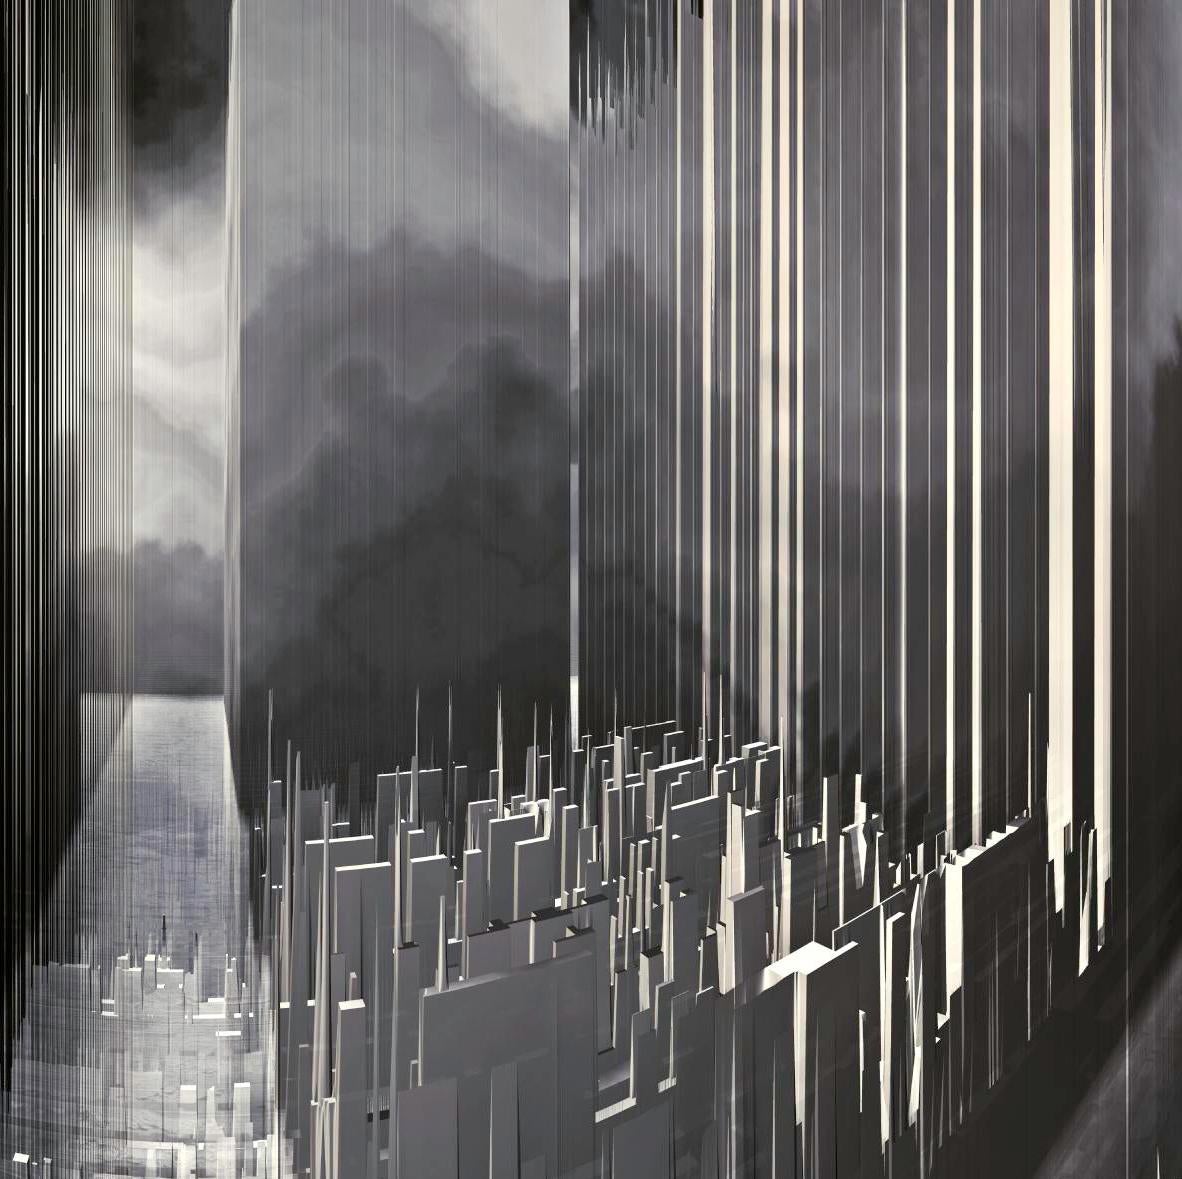 City Landcuts - Vision of a Urban Territory - Abstract Cityscapes - Contemporary Photograph by Paul-Émile Rioux